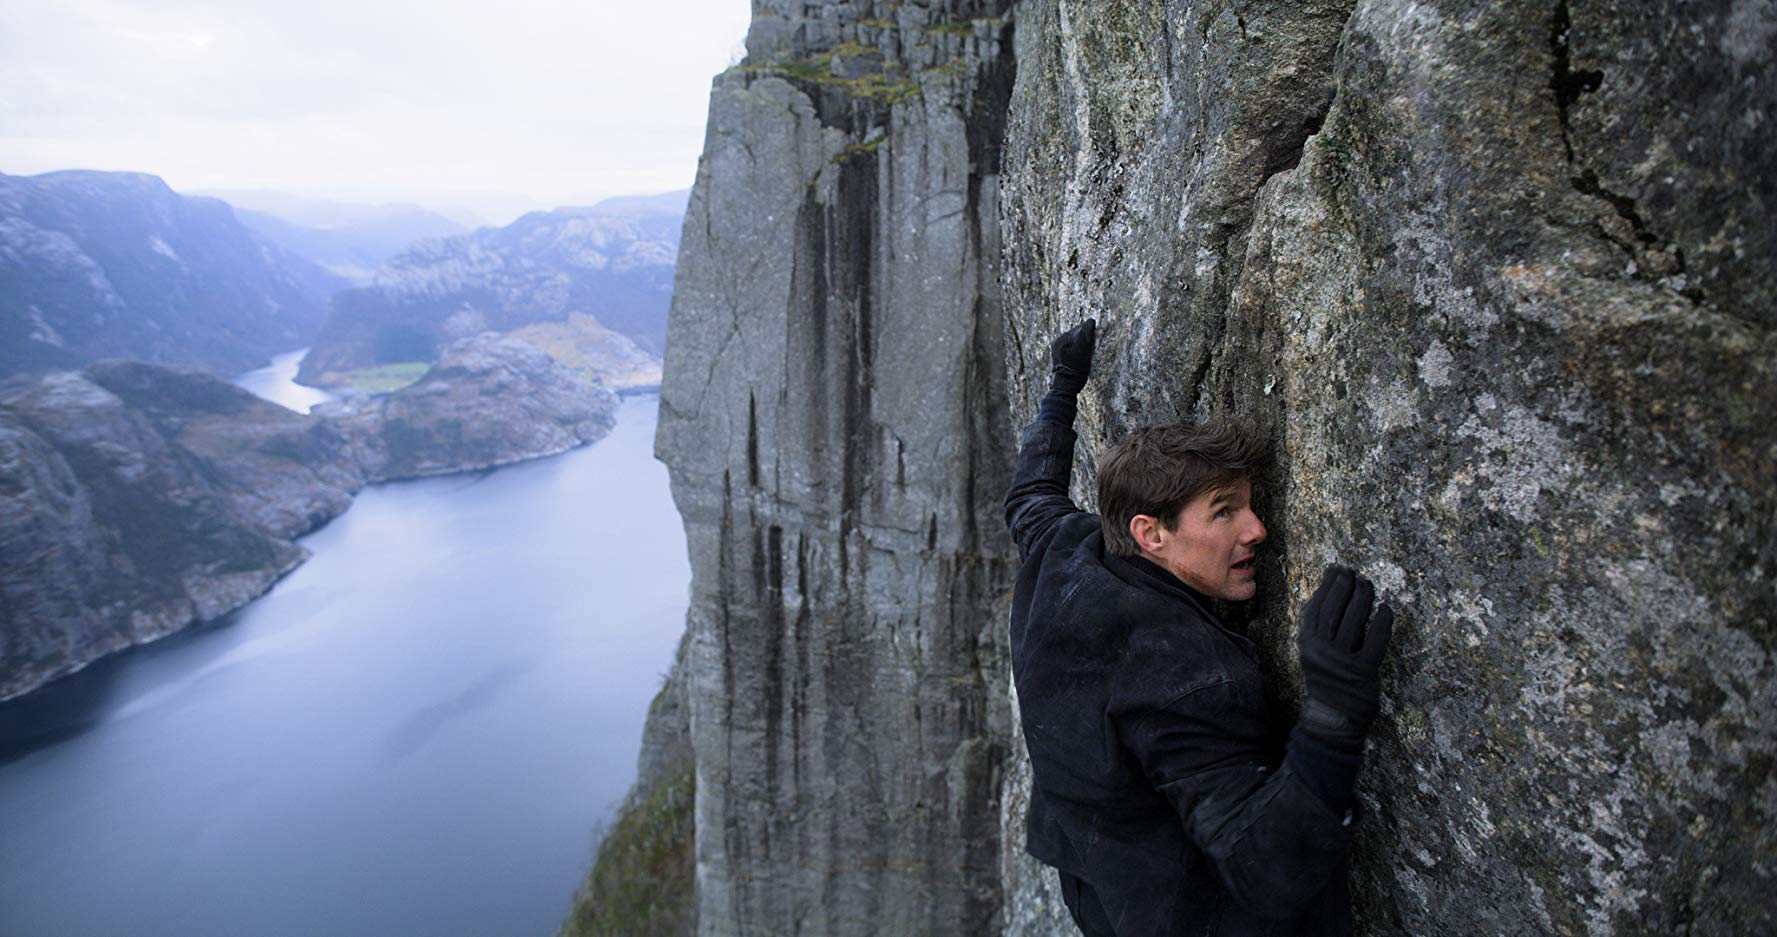 Mission: Impossible - Fallout, movie reviews, Lucas Mirabella